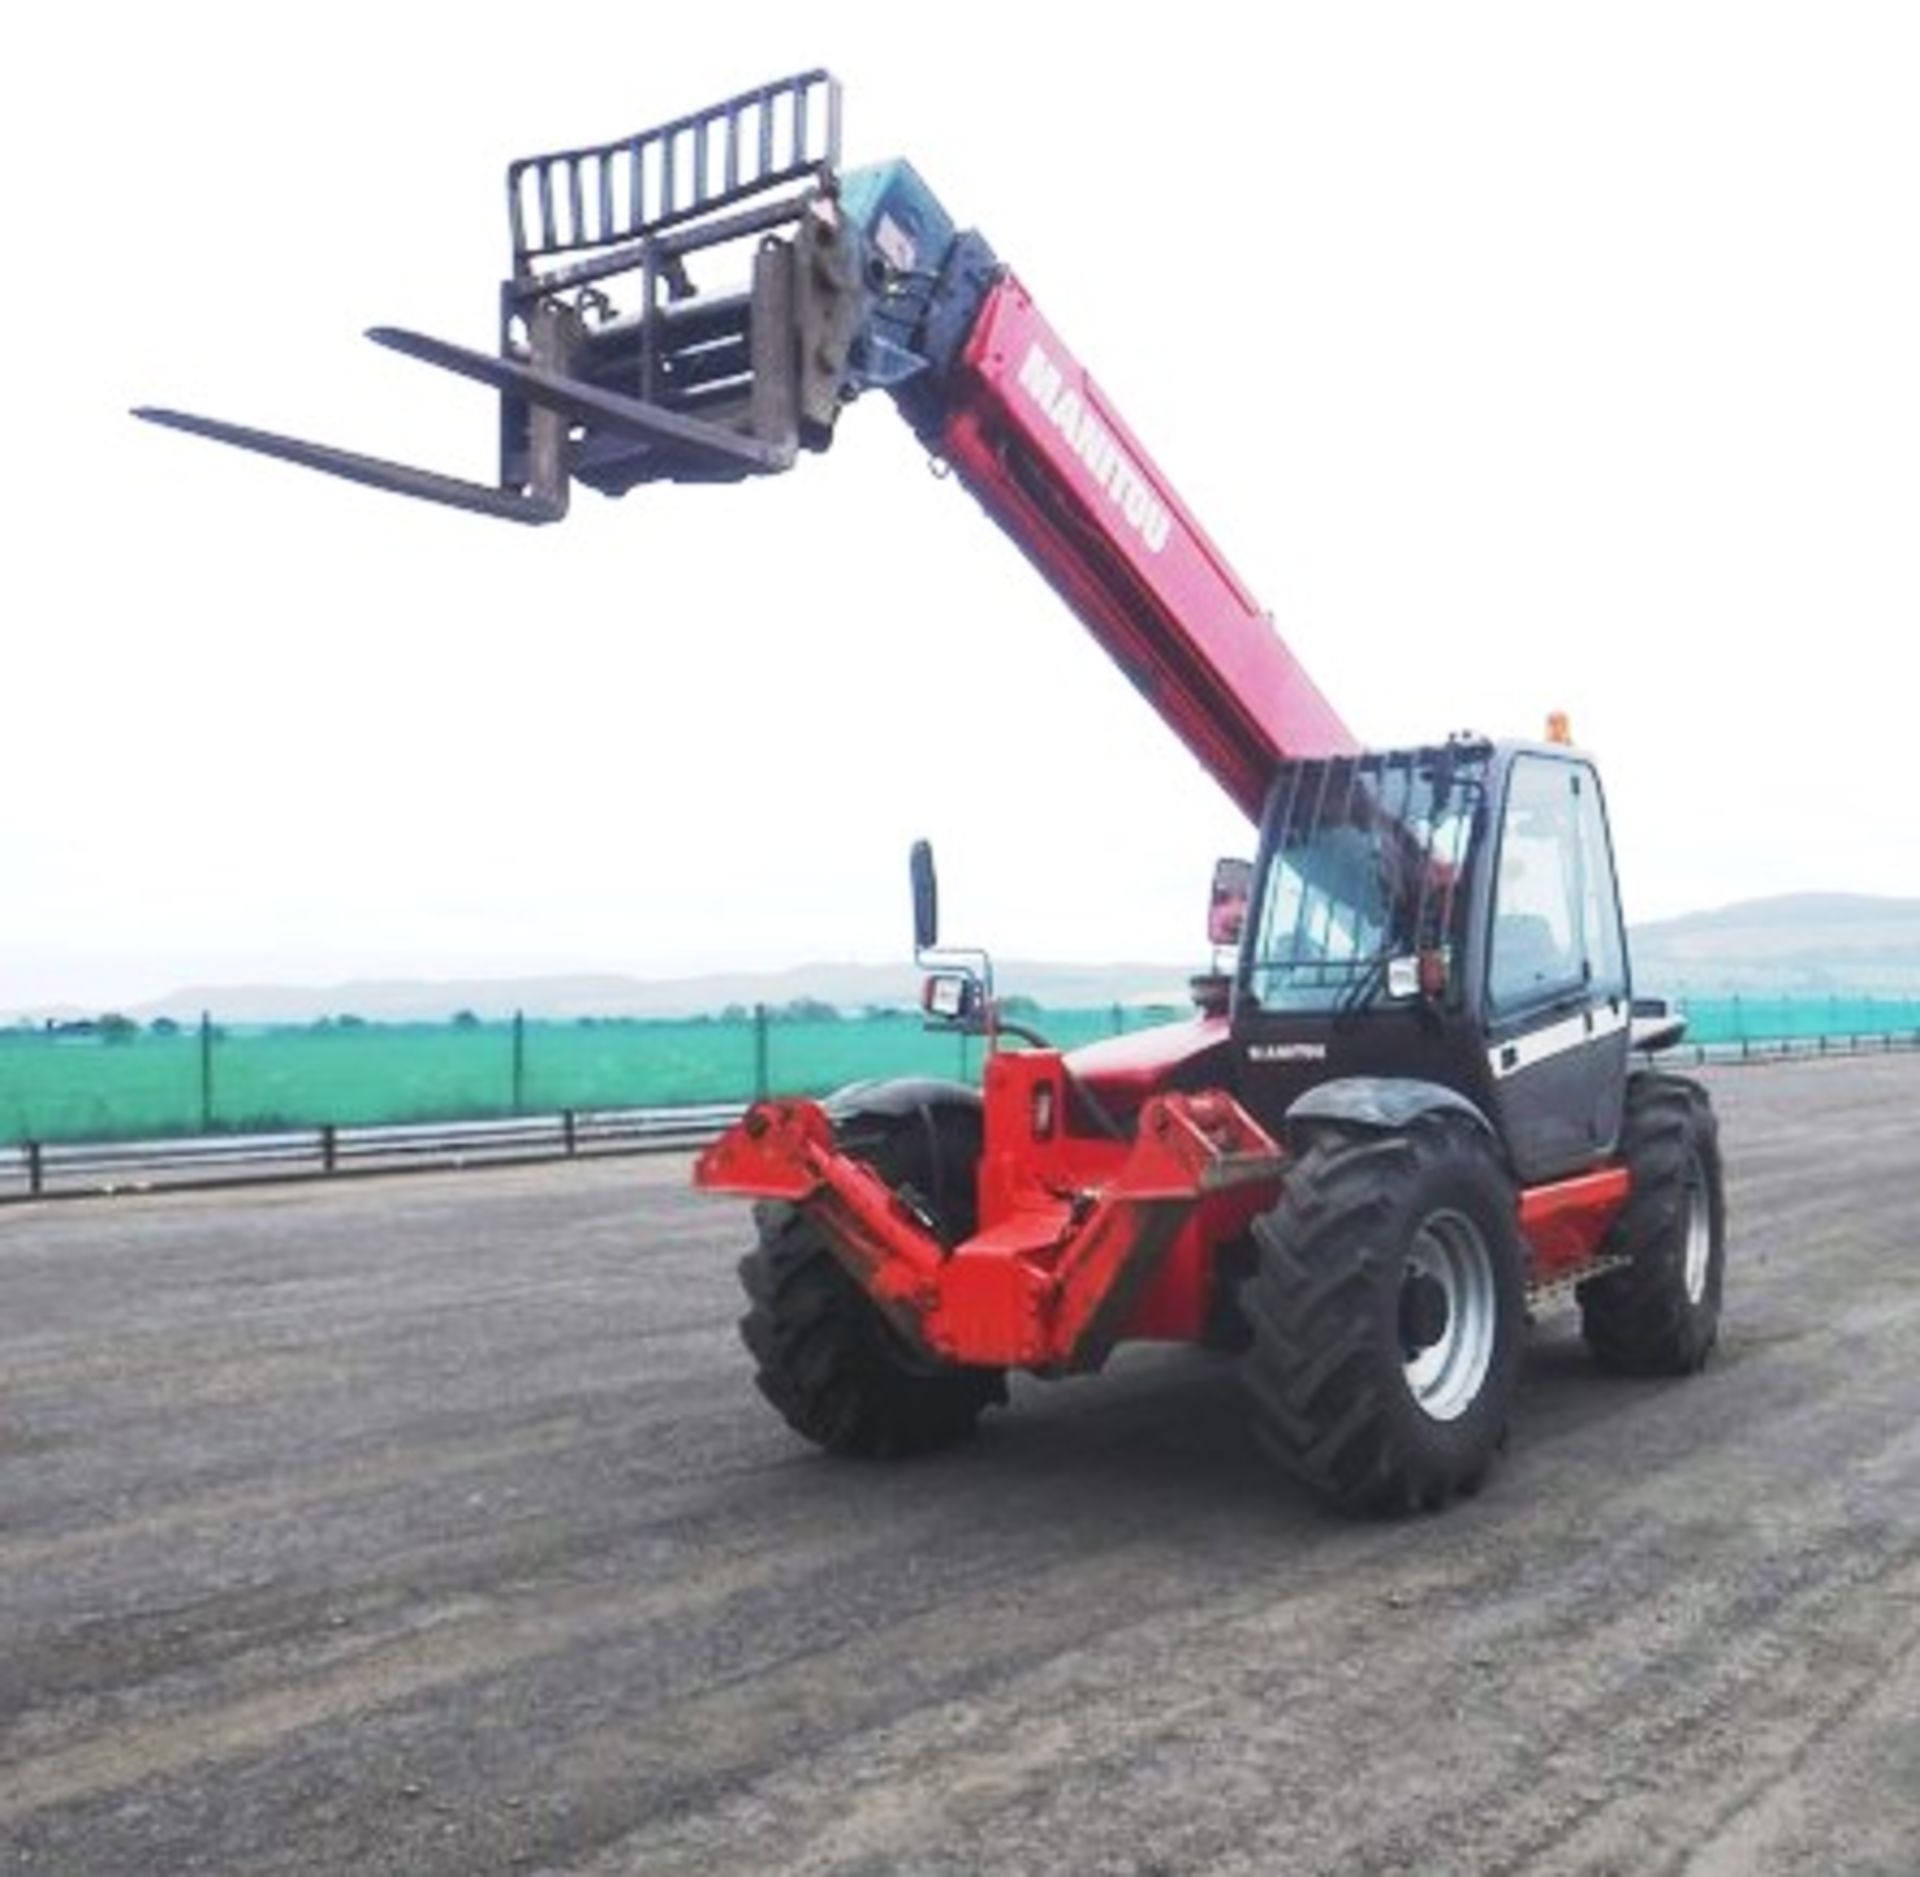 2006 MANITOU 14/35 TELEHANDLER c/w bucket & forks s/n 1230044 Reg no SP06 AXX 2646hrs (not verified) - Image 22 of 31